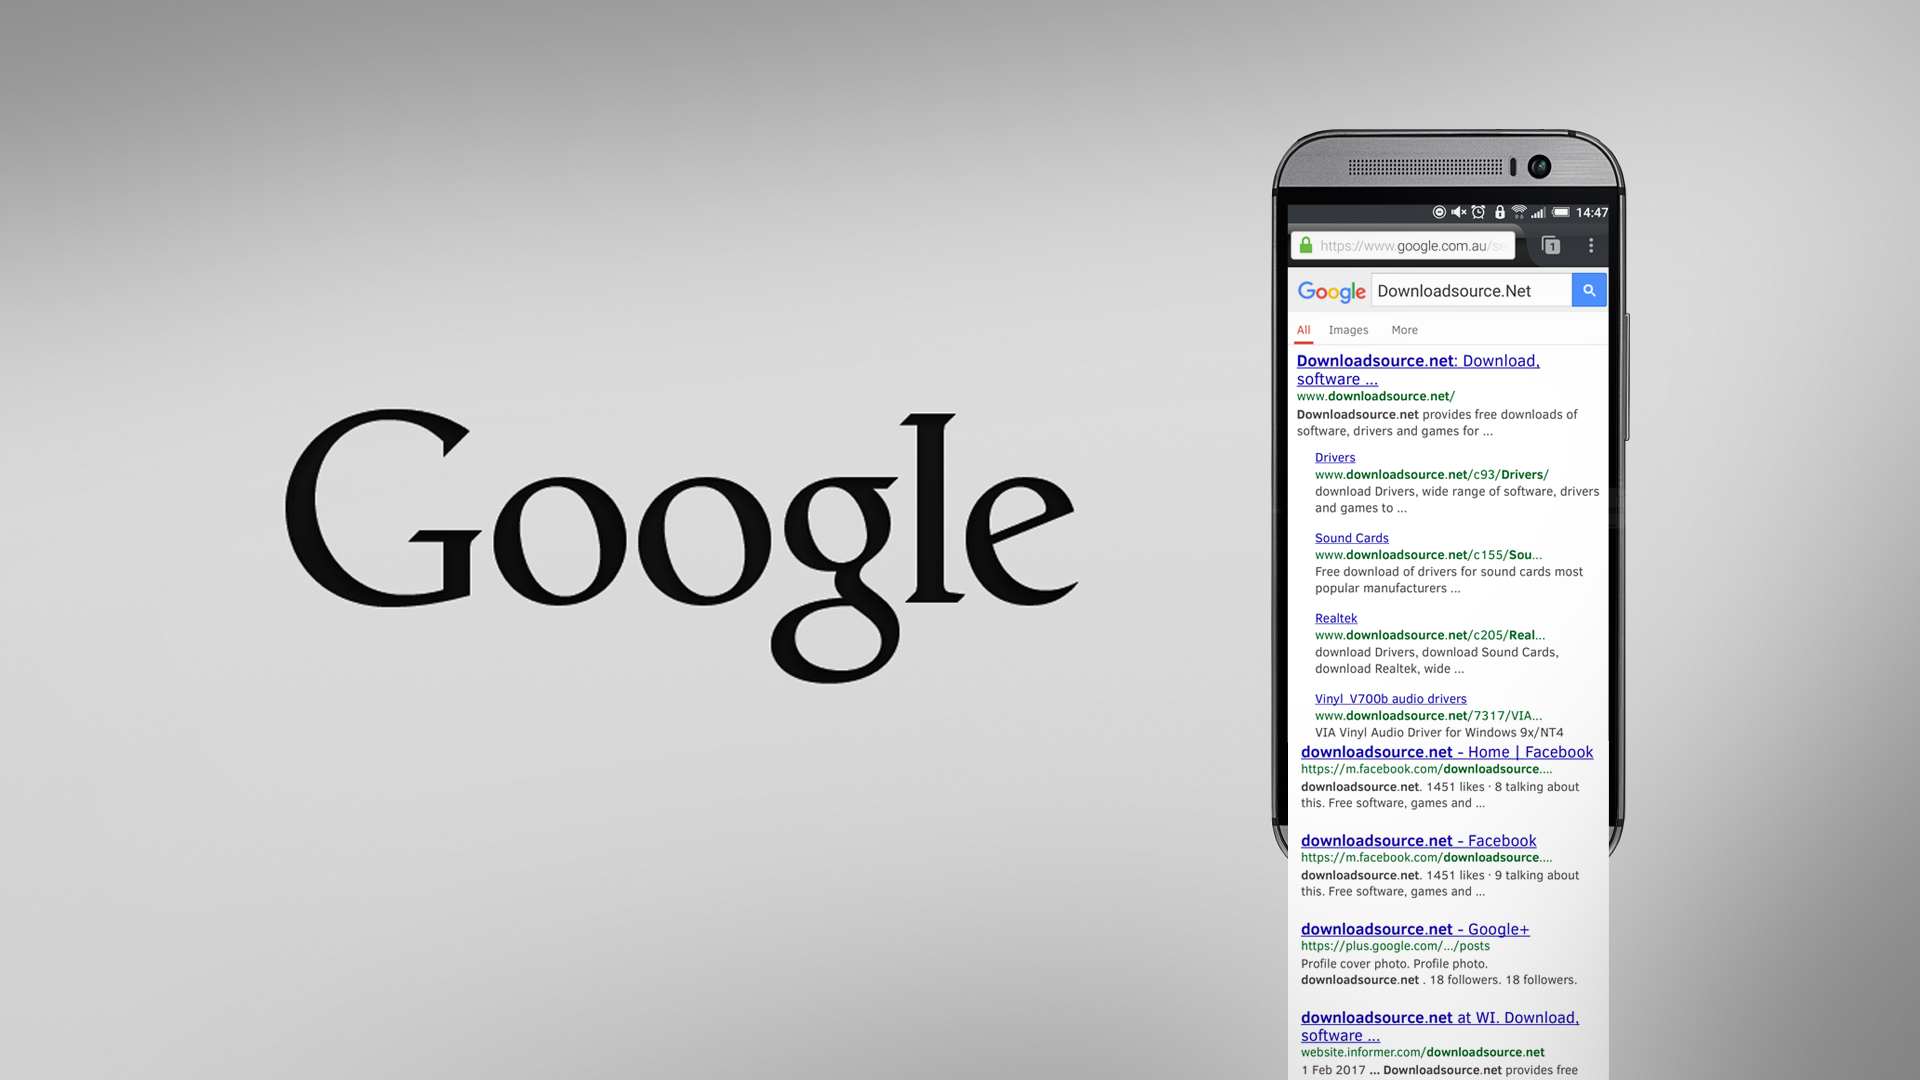 How_to_get_google_to_show_more_results_per_page_on_mobile